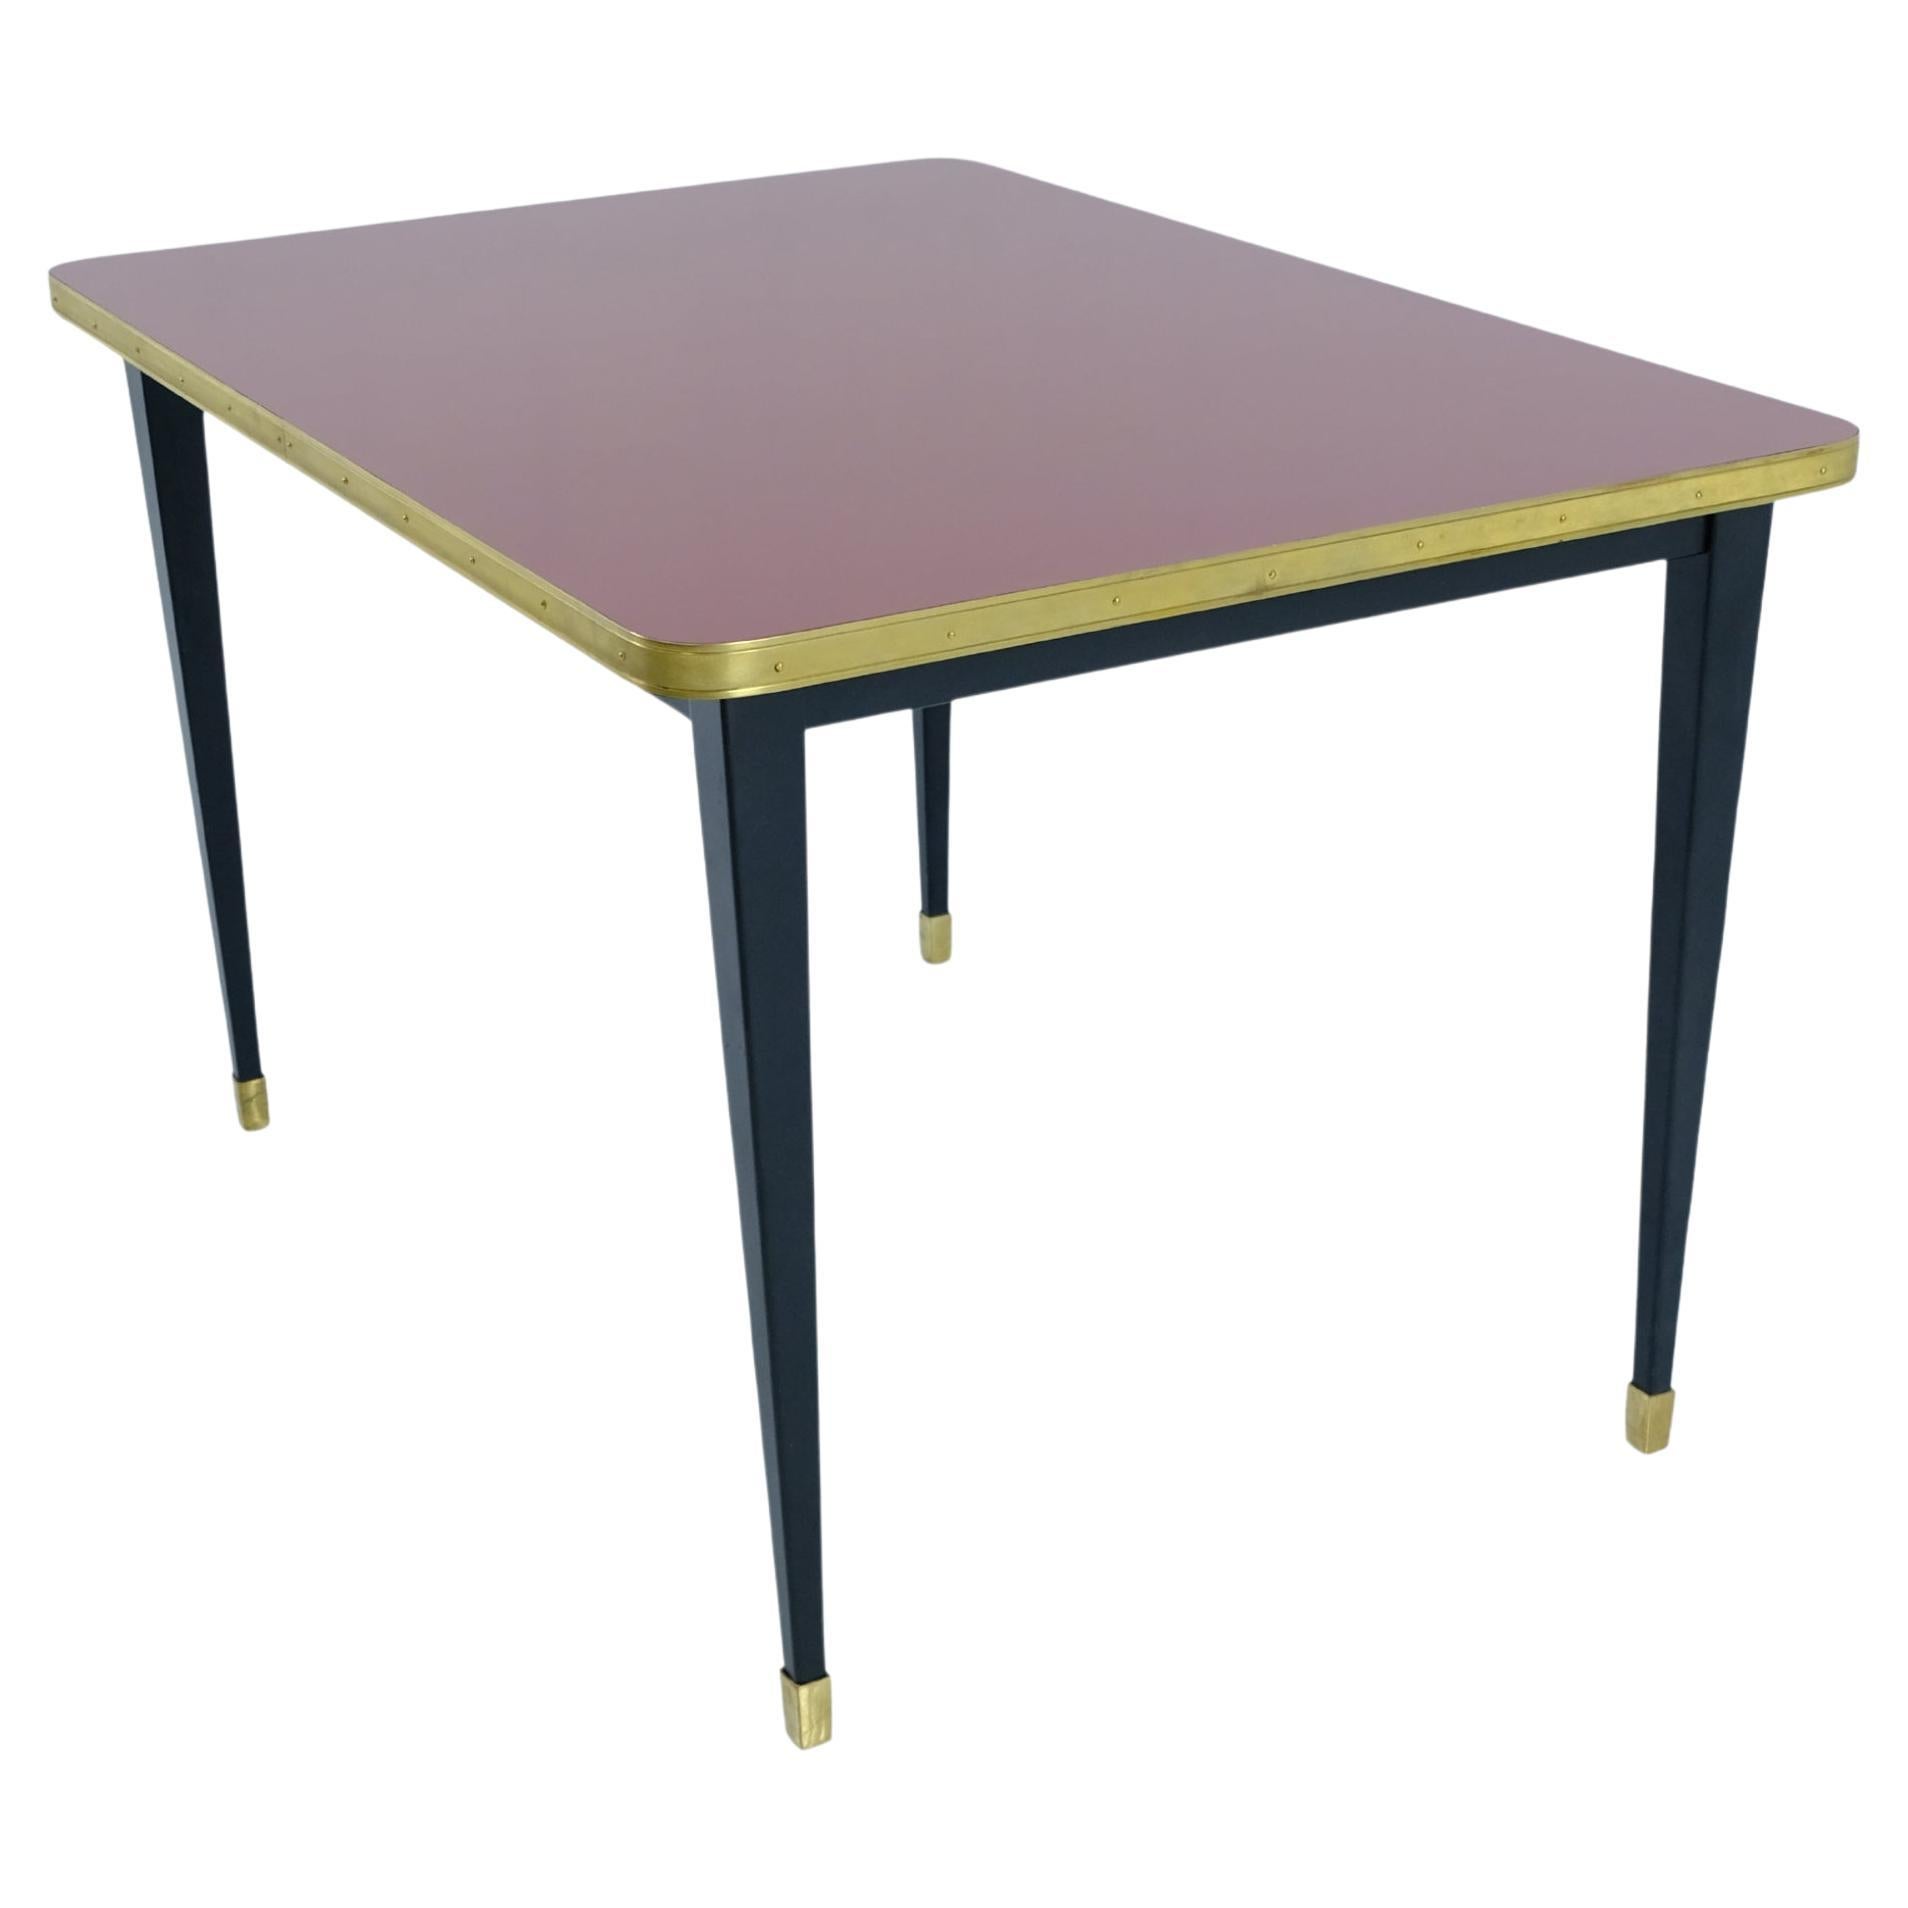 Dinning Table, High Gloss Laminate, Brass, Conic Legs, Burgundy - S For Sale